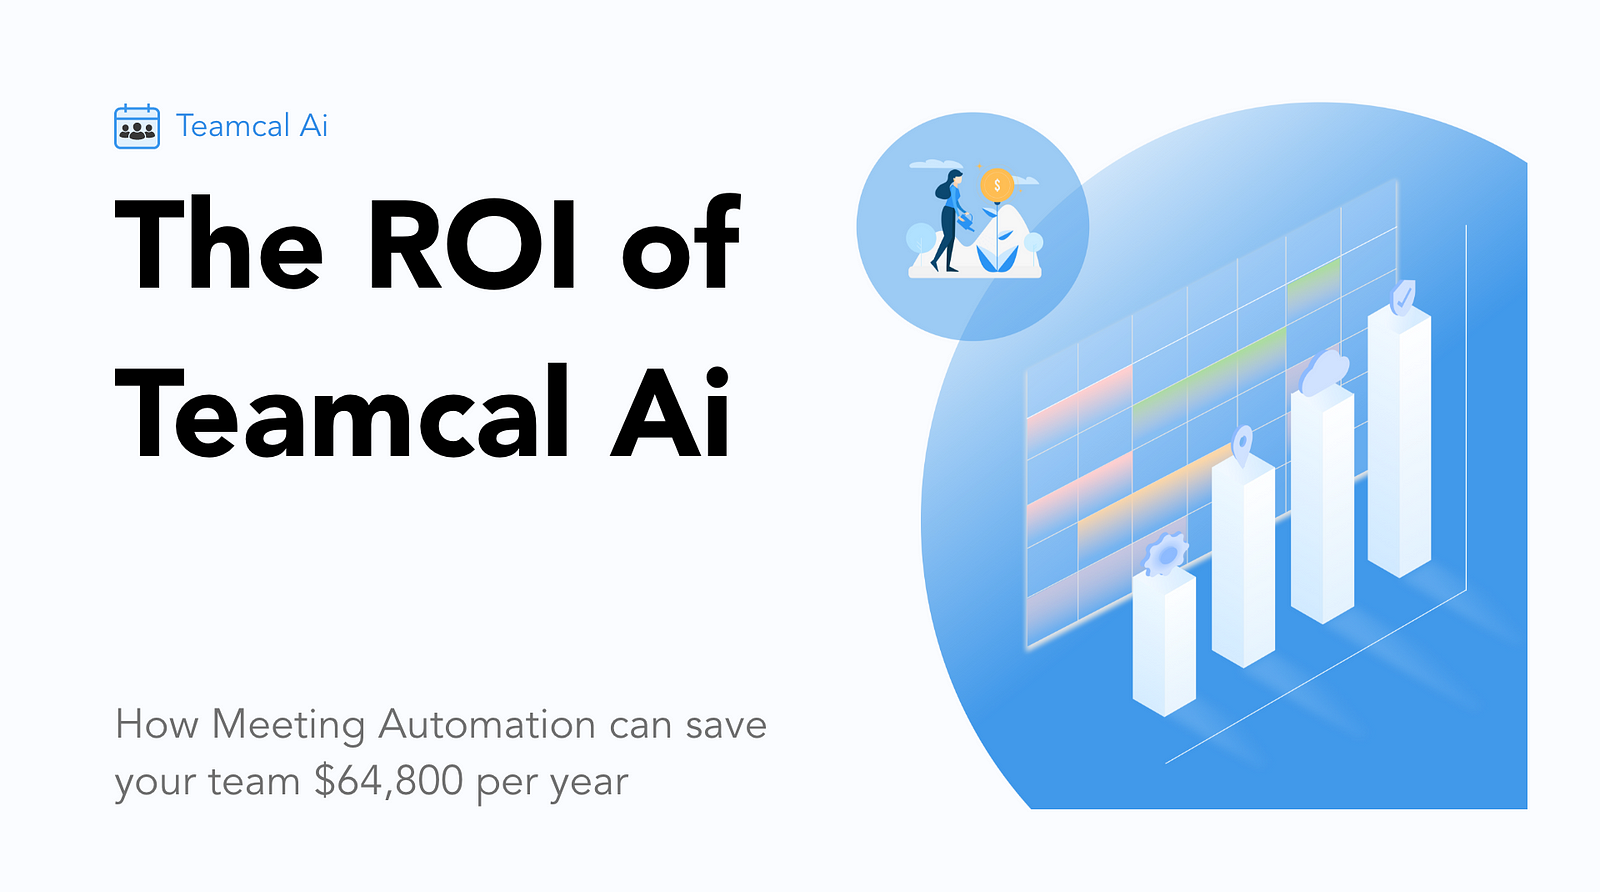 The ROI of Teamcal Ai — How Meeting Automation can save your team $64800 per year